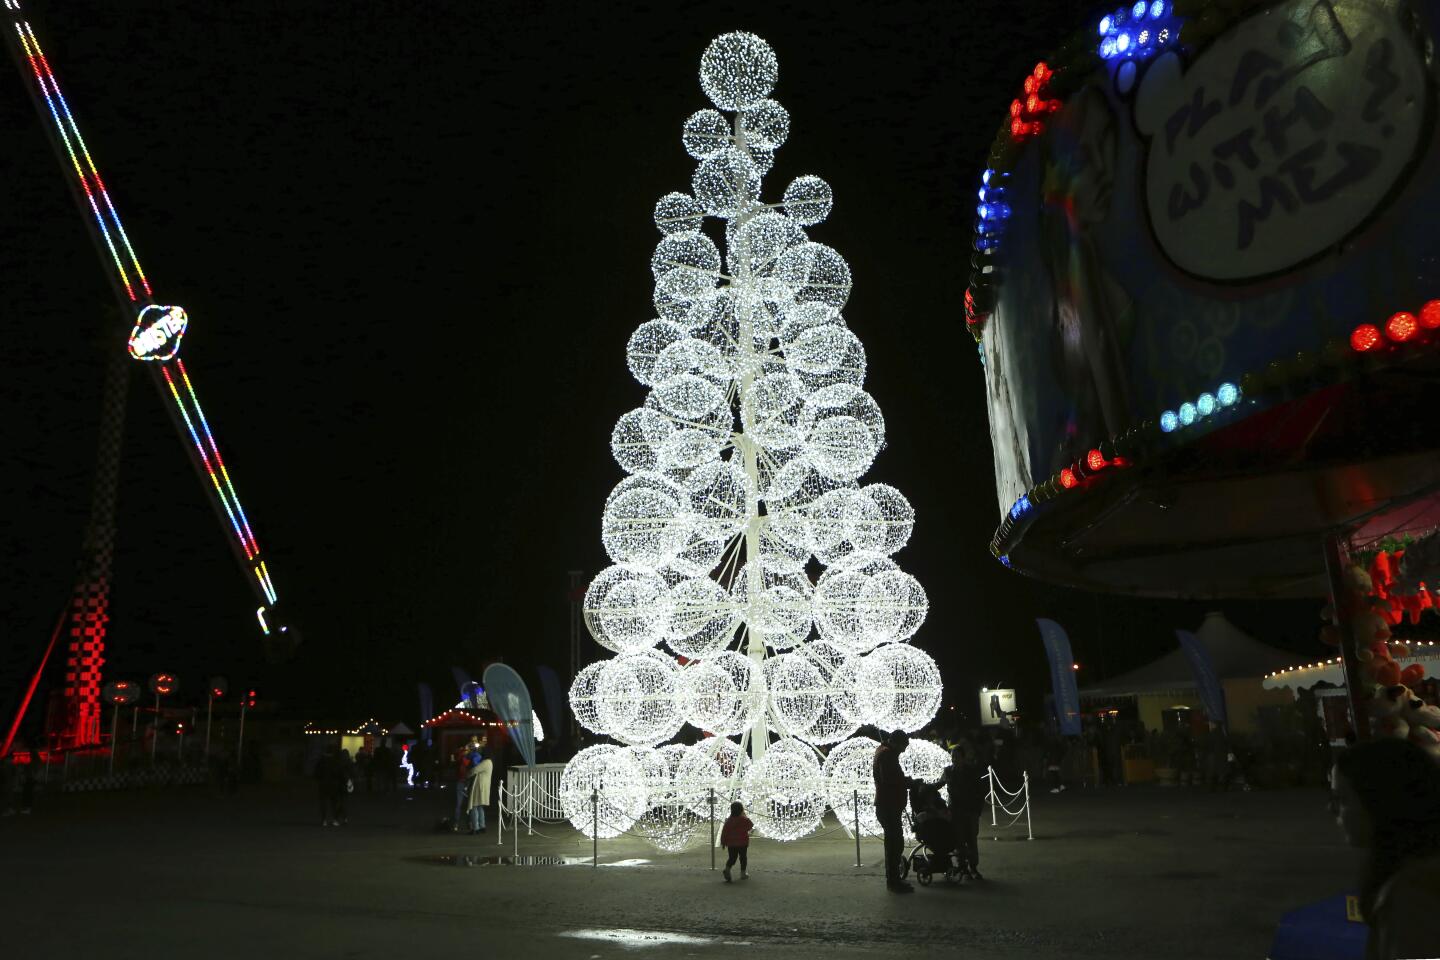 A child, walks in front of an illuminate Christmas tree at the Christmas Luna park in capital Nicosia, Cyprus, Sunday, Dec. 15, 2019. Seasonal entertainments are happening at many locations over the island with special events planned for Christmas and for New Year. (AP Photo/Petros Karadjias)